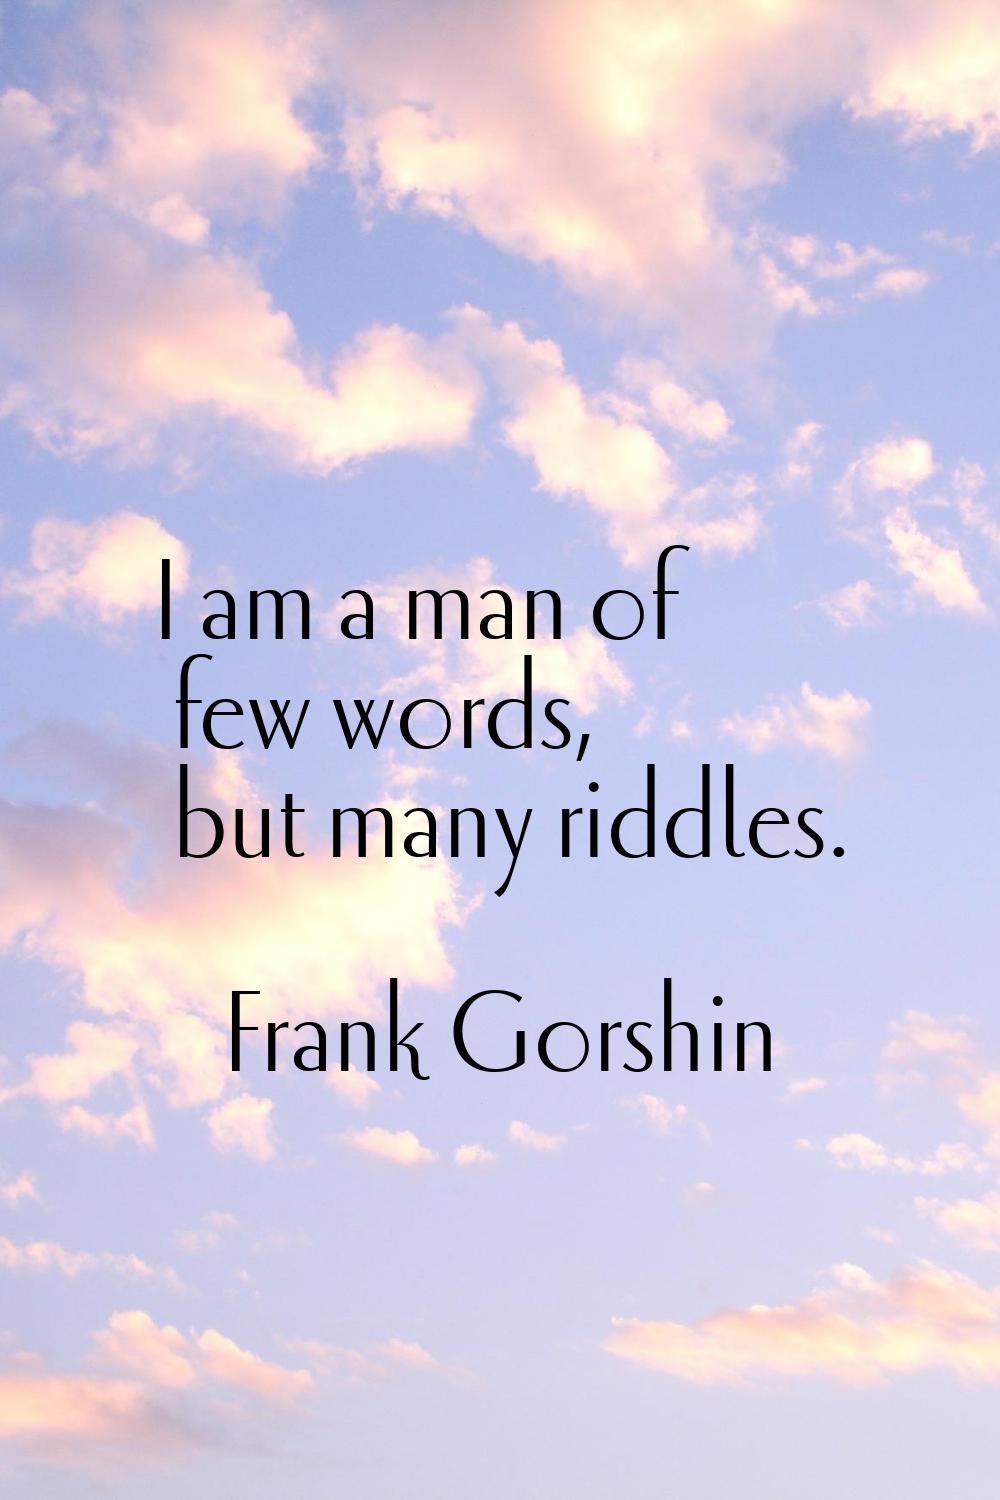 I am a man of few words, but many riddles.